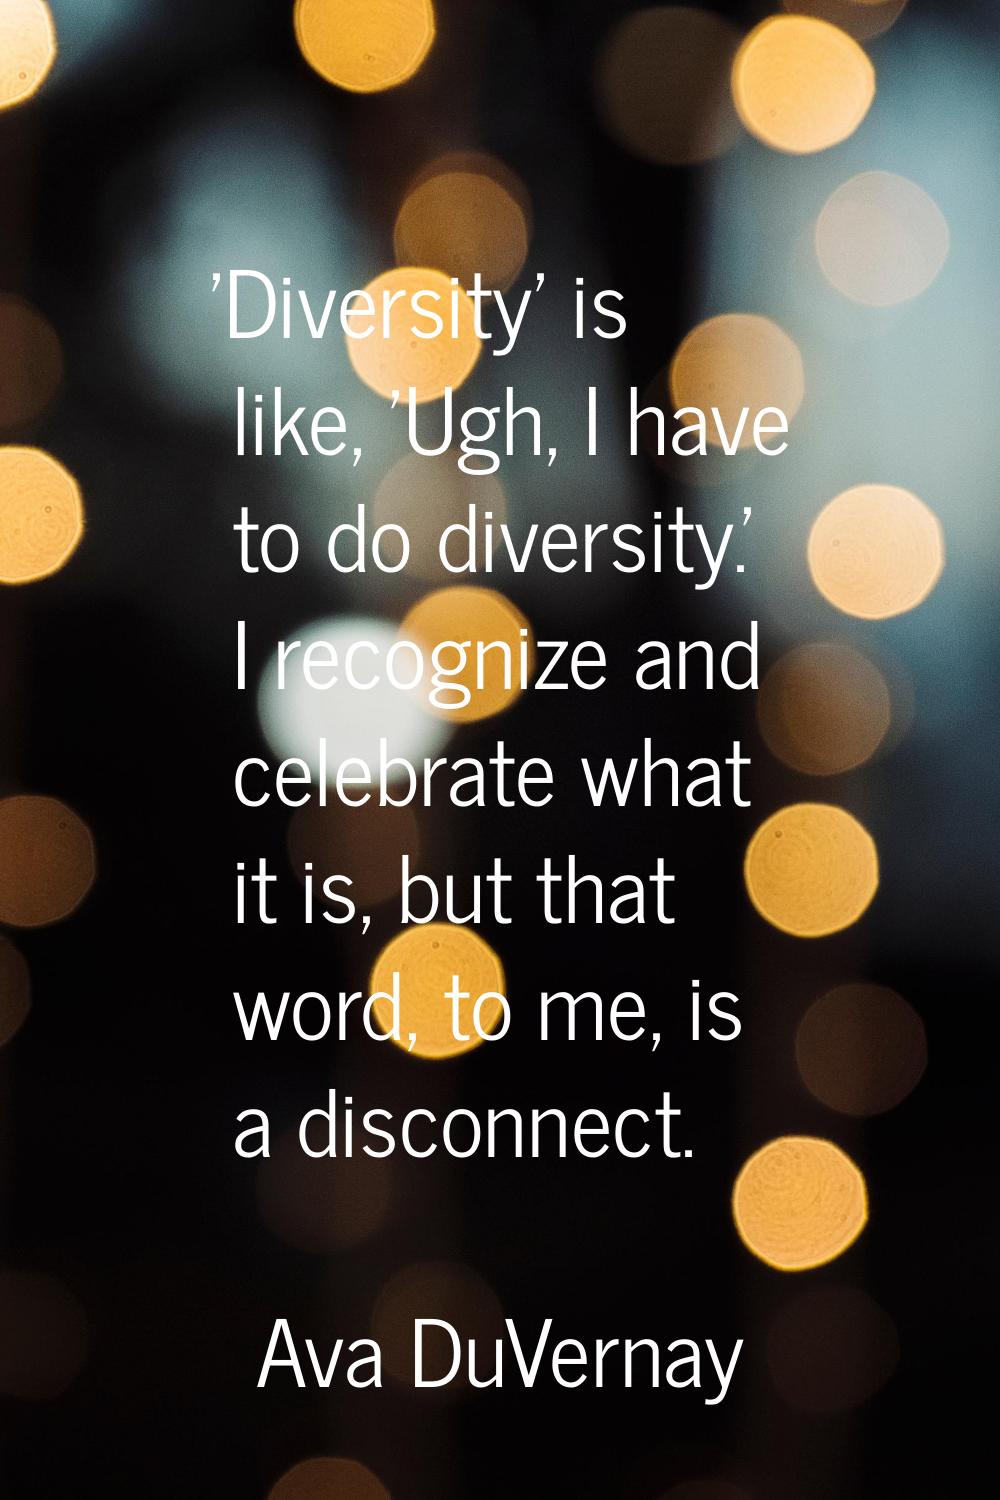 'Diversity' is like, 'Ugh, I have to do diversity.' I recognize and celebrate what it is, but that 